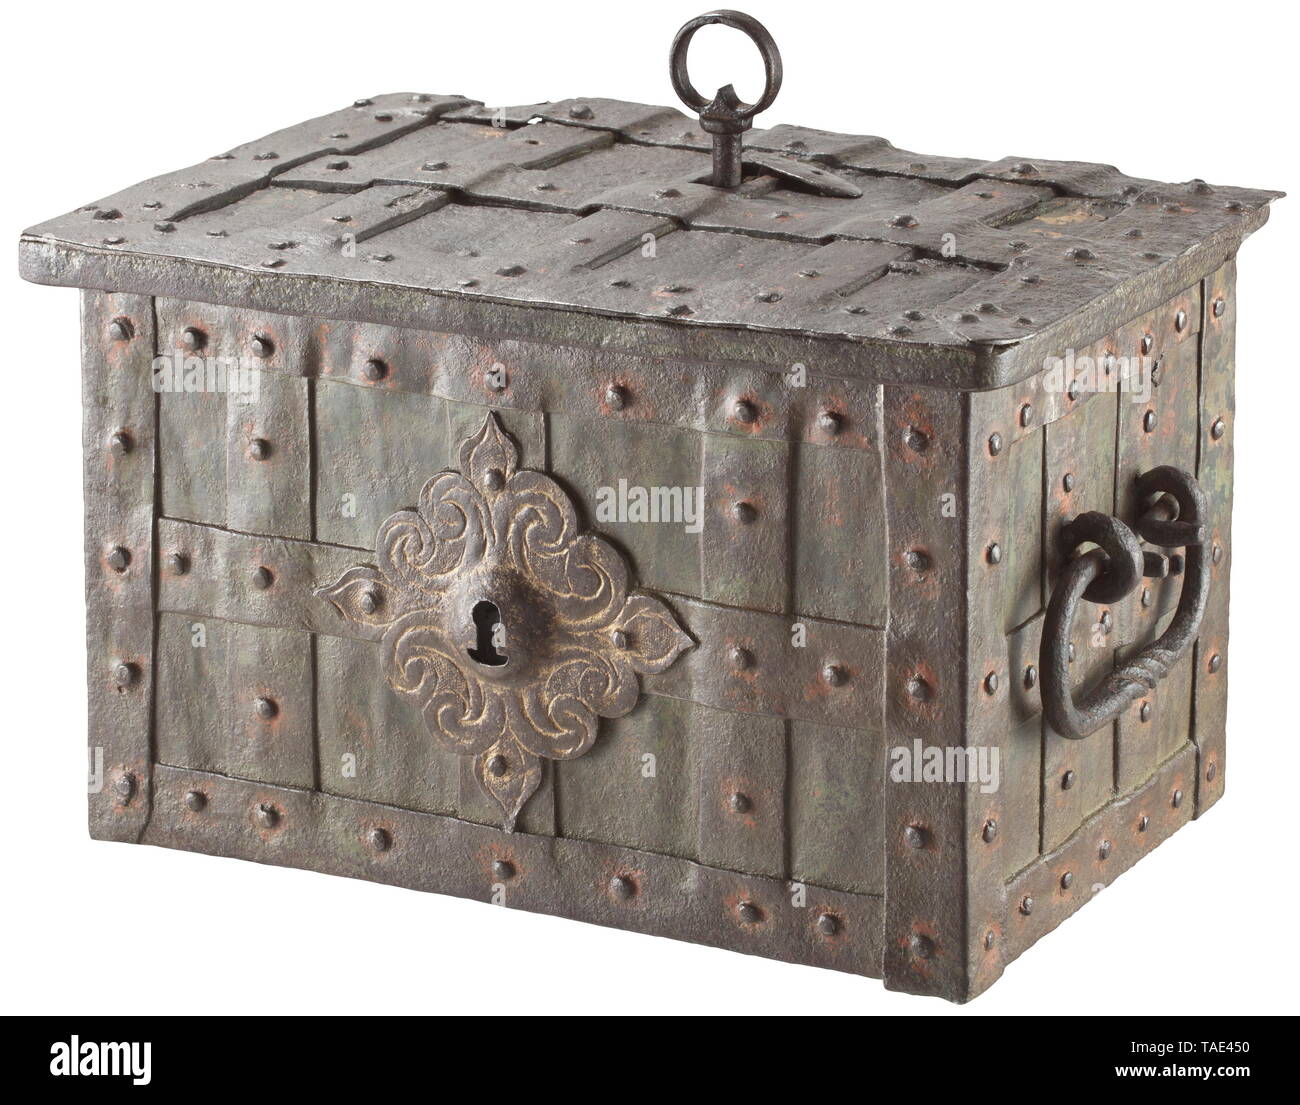 A small German war chest, circa 1700 Rectangular sheet iron body with iron strap fittings. Fake keyhole with richly decorated escutcheon at the front. Two movable side handles. The hinged lid with central keyhole, spring-loaded cover plate. Lock mechanism consisting of four locks, chaplet with preserved ward and original hollow shank key. Screw-mounted cover plate with engraved and blued rocaille decoration. The interior coated with old red lead paint. Dimensions 23.5 x 39 x 27 cm. historic, historical, handicrafts, handcraft, craft, object, obje, Additional-Rights-Clearance-Info-Not-Available Stock Photo